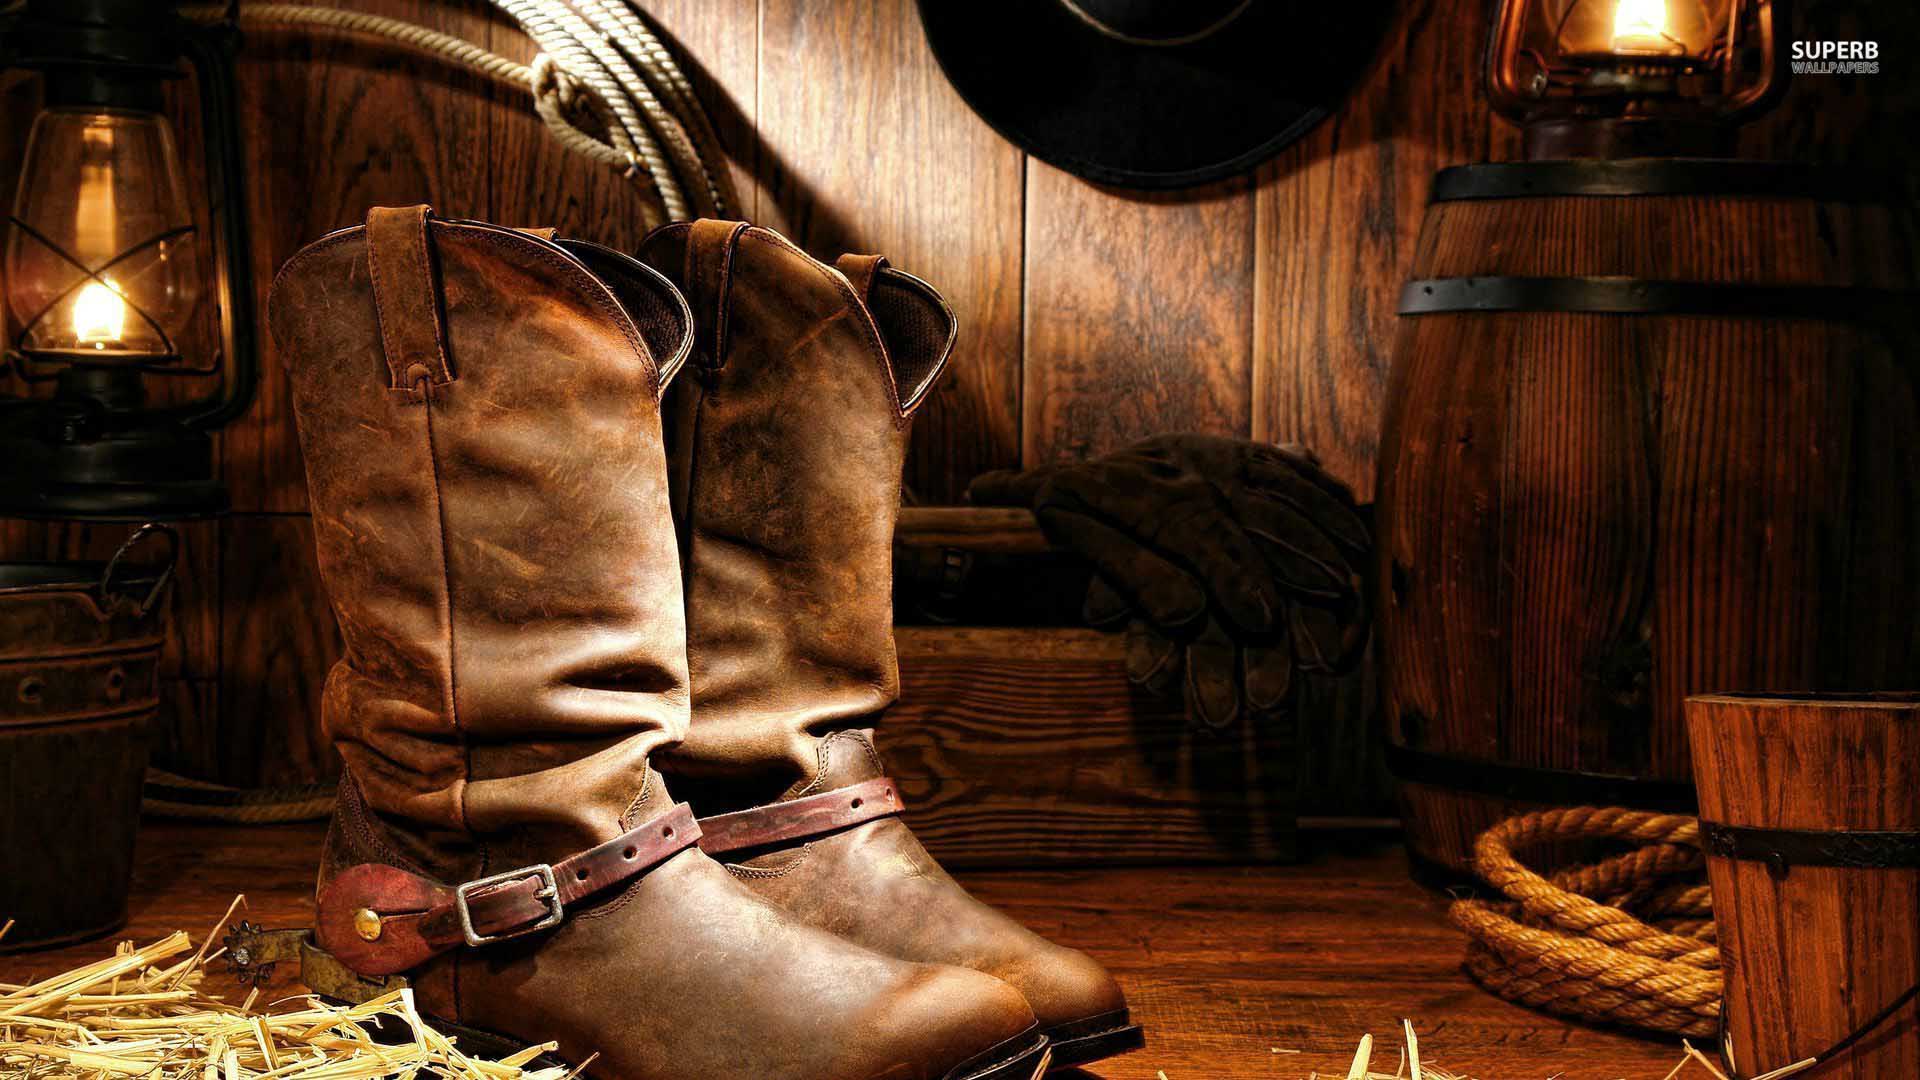 Cowboy Boots Desktop Wallpapers Daily Backgrounds in HD 1920x1080